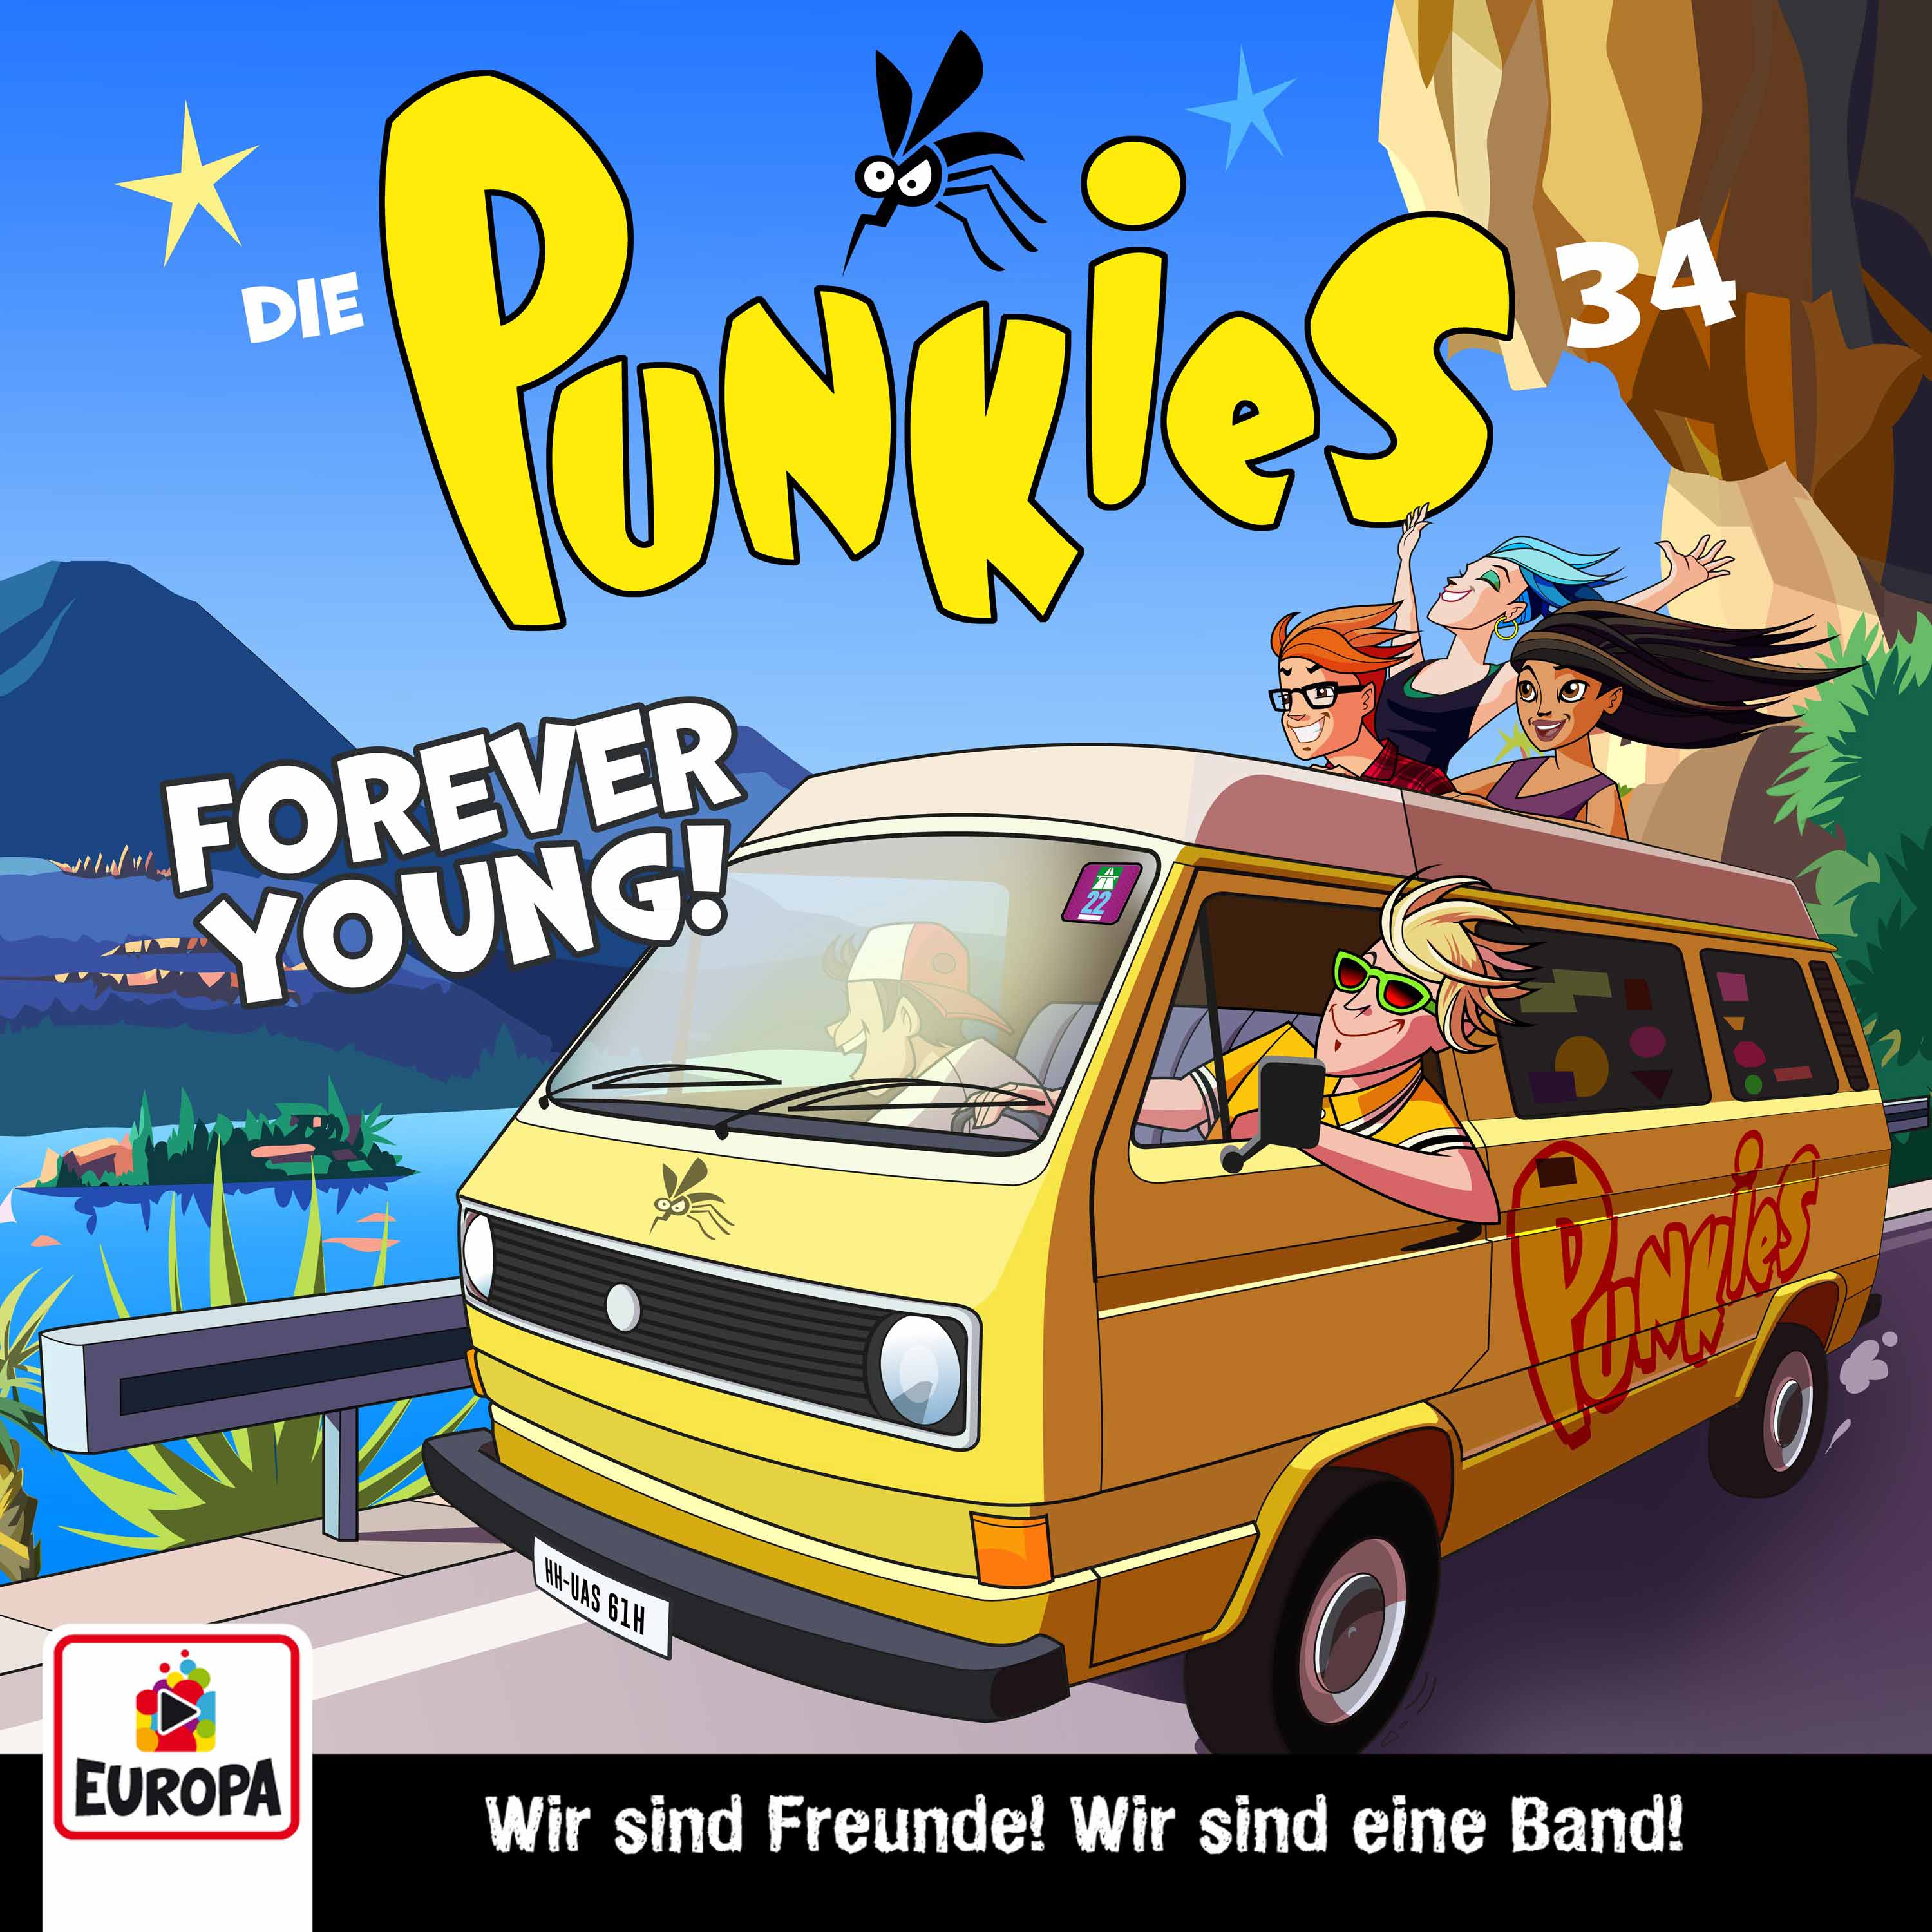 Die Punkies : Forever Young!